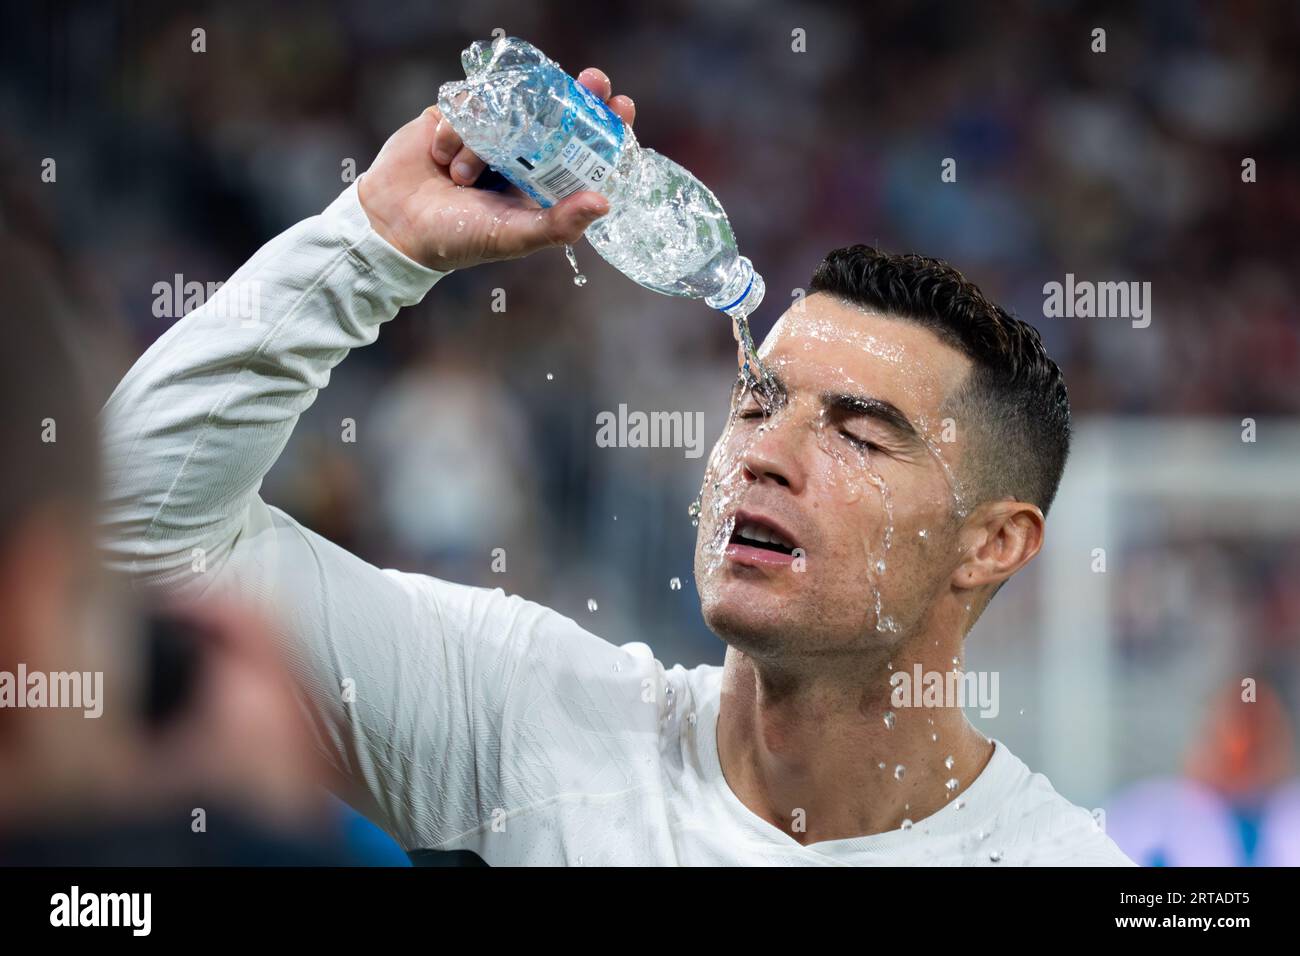 Cristiano Ronaldo seen after the European Qualifier match between Slovakia and Portugal which took place in Bratislava. Portugal won the match 1:0 and remained unbeaten on top of Group J. The only goal was scored by Bruno Fernandes. Cristiano Ronaldo received his third yellow card and he missed next match. Stock Photo